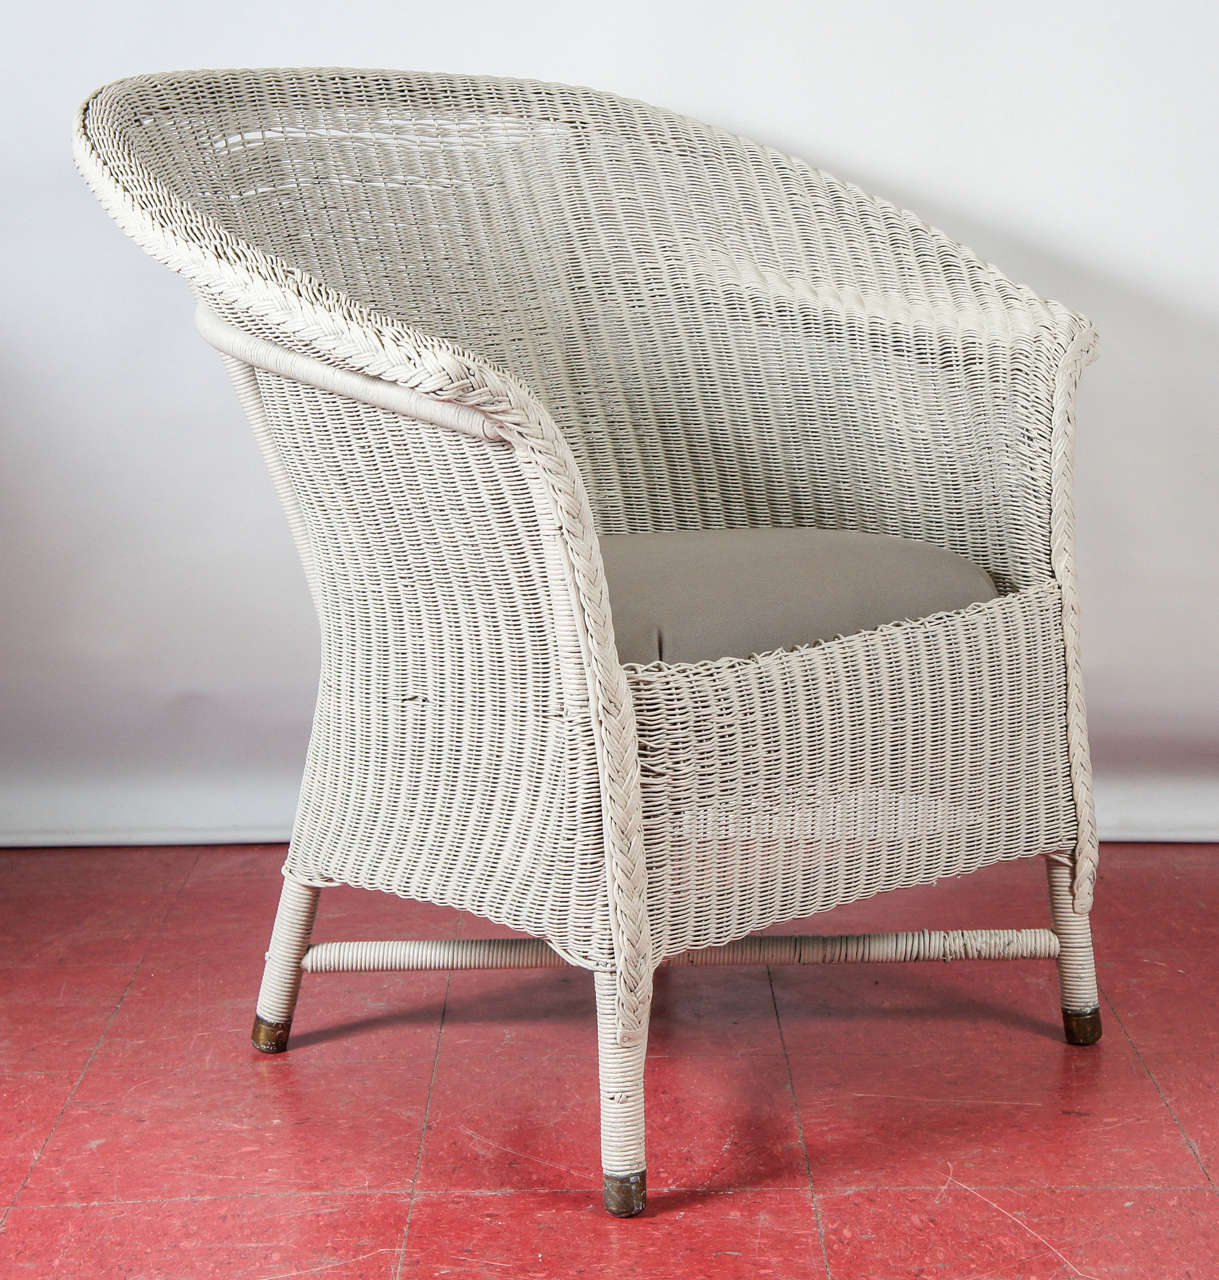 An original Lloyd Loom armchair. The material for these chairs and furniture was invented by Lloyd a 100 years ago associated with the Art Deco movement. The furniture is made using a unique process or twisted paper and wire on steam bent beach